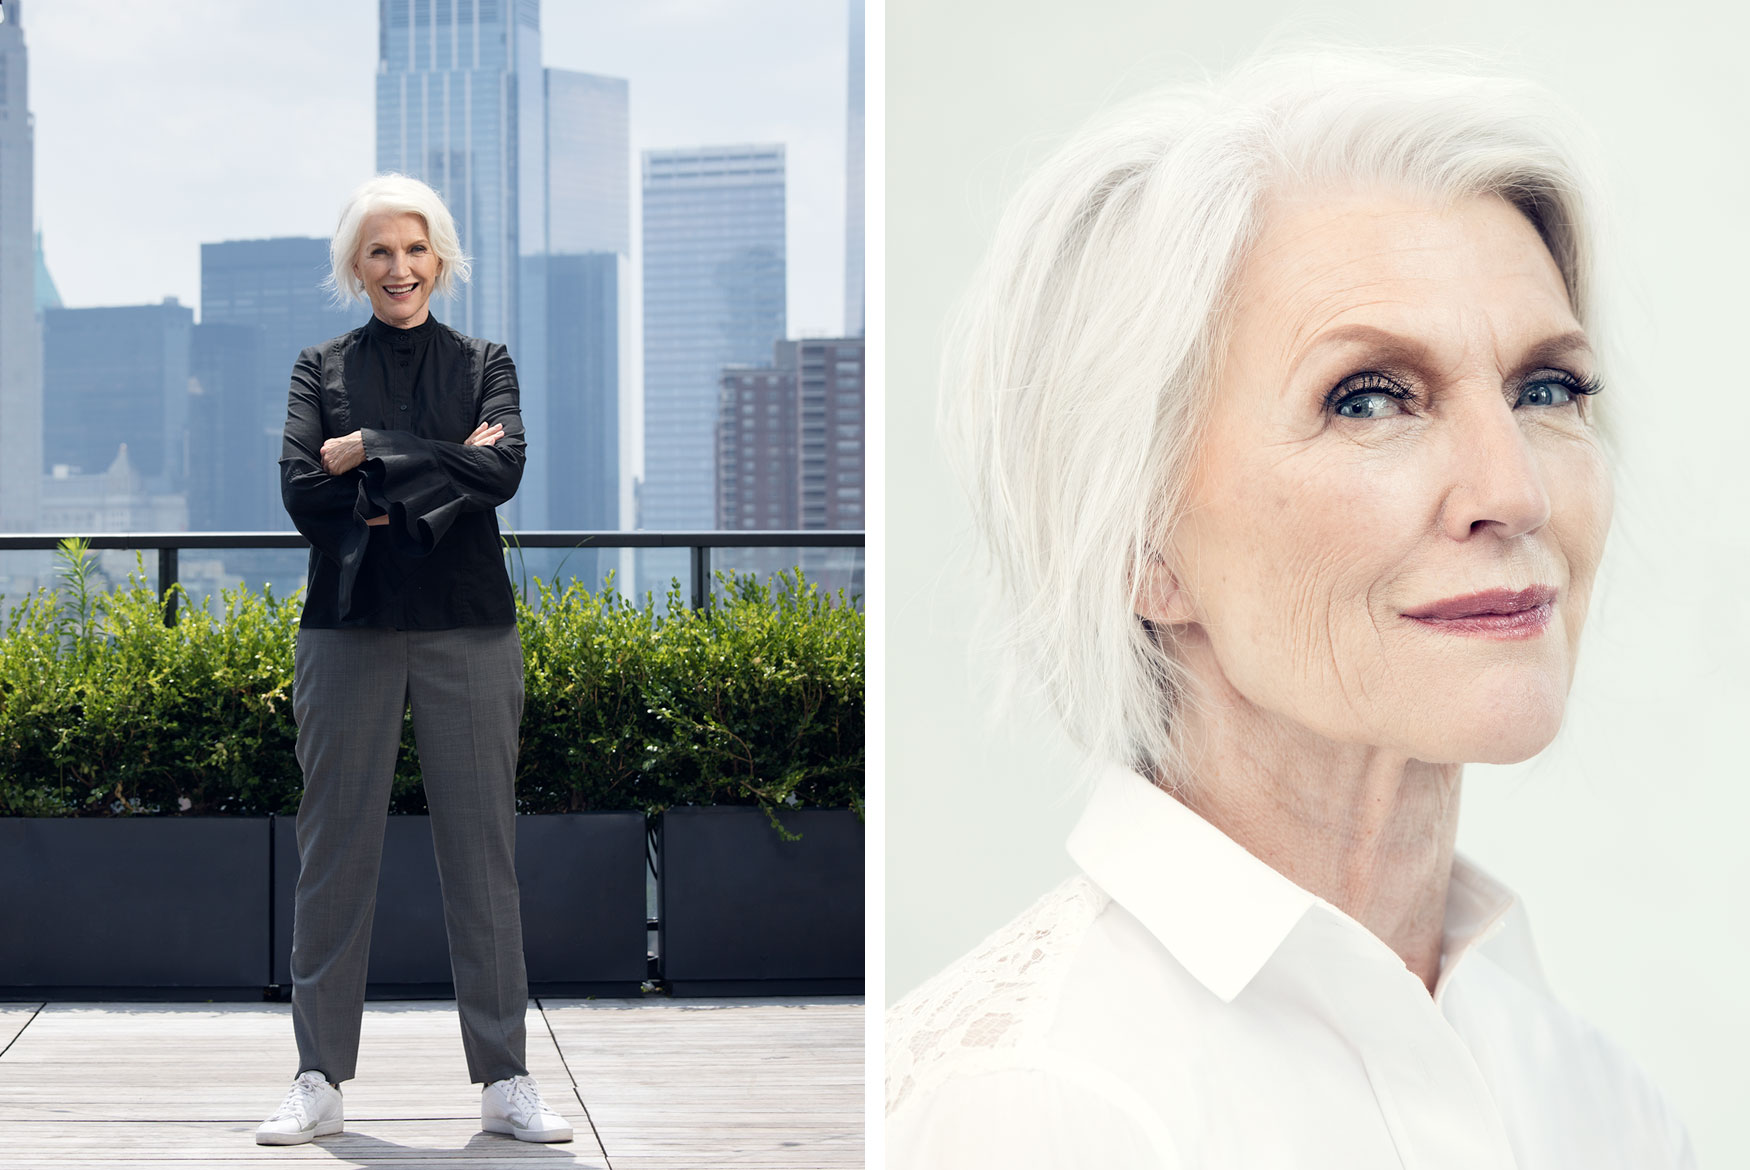 Maye Musk photographed in New York City